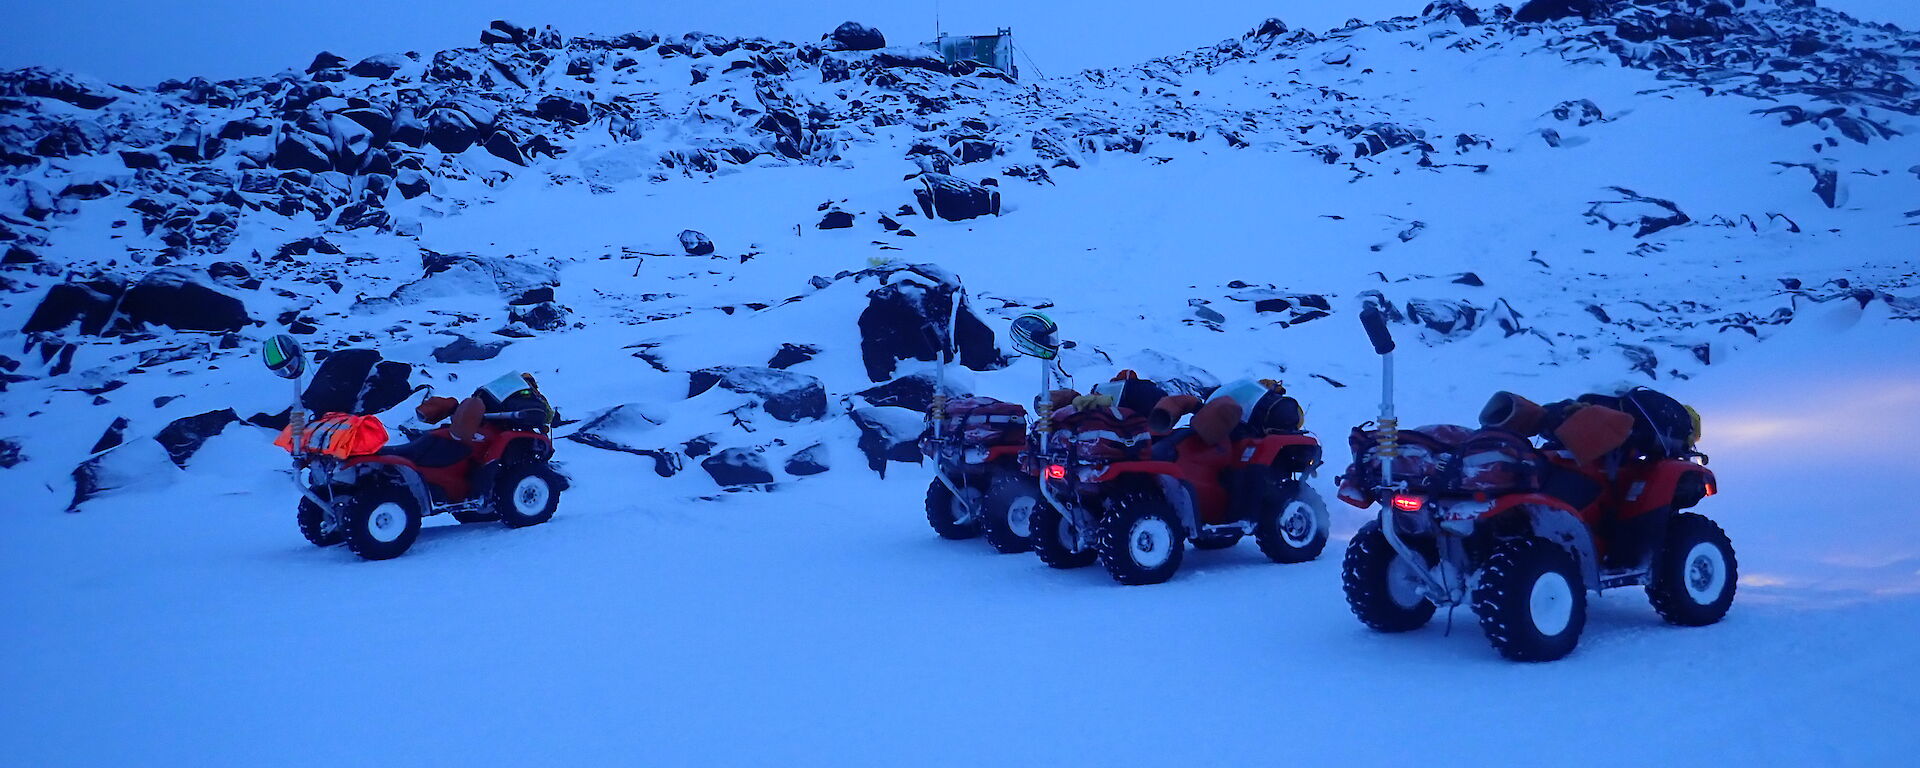 four quad bikes in front of a landscape of snow and rocks